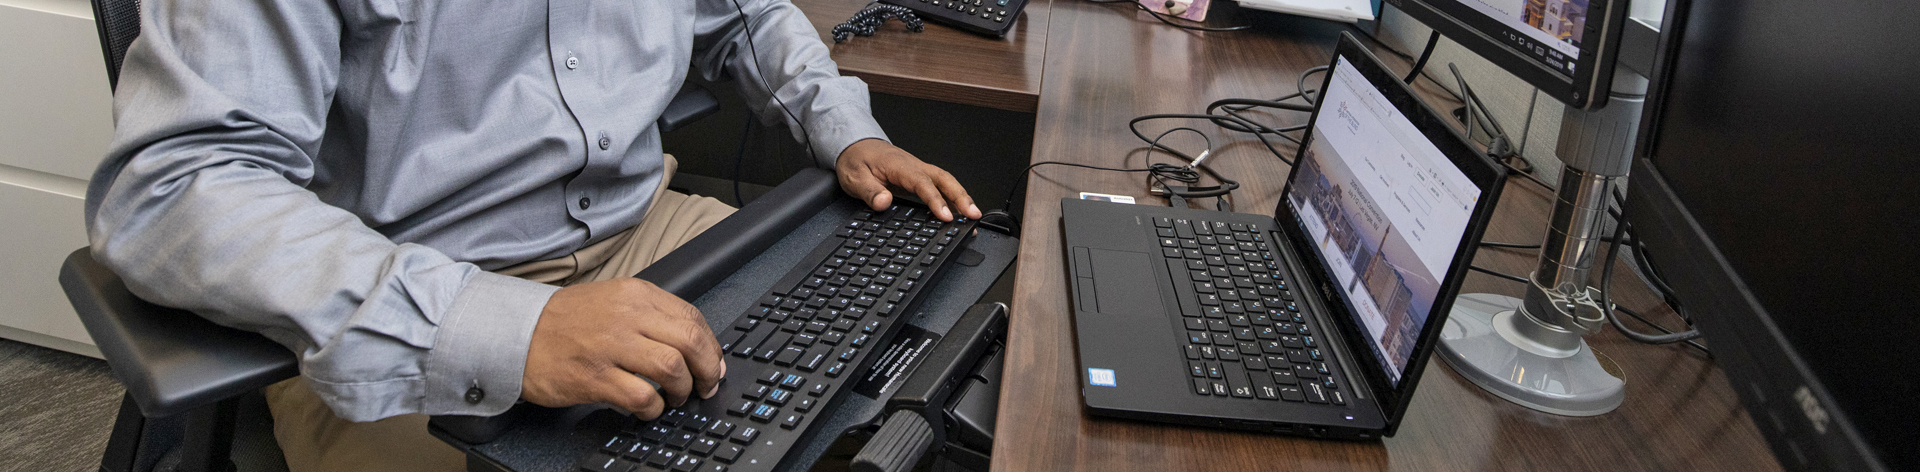 Photo of hands on a computer keyboard with a laptop sitting in front of it.